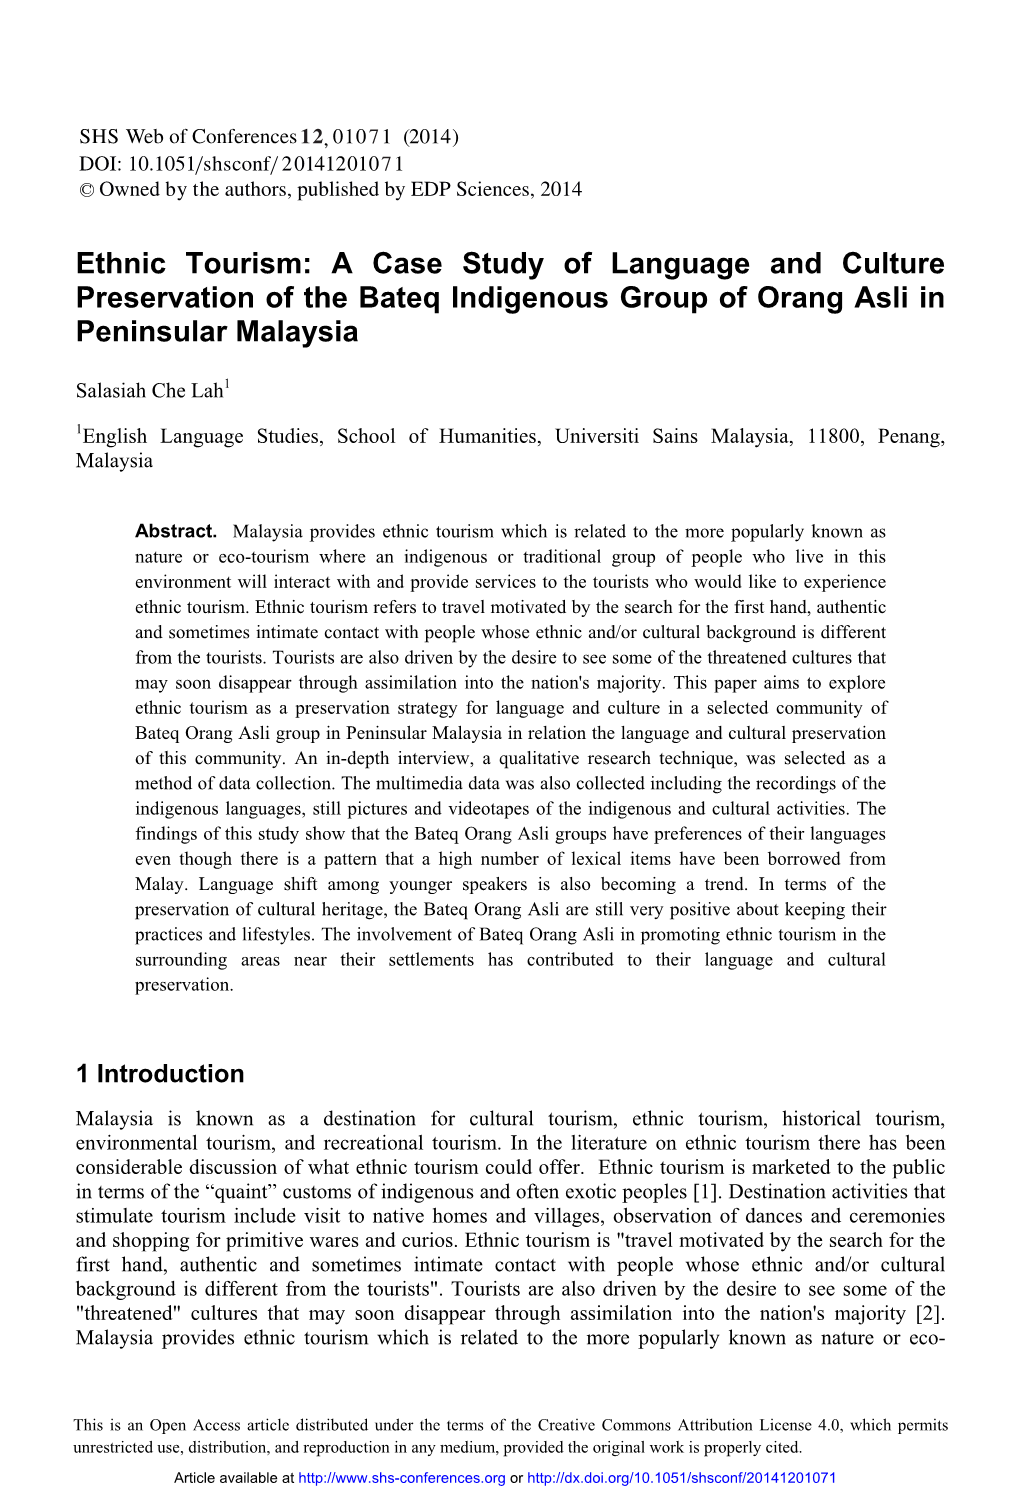 Ethnic Tourism: a Case Study of Language and Culture Preservation of the Bateq Indigenous Group of Orang Asli in Peninsular Malaysia